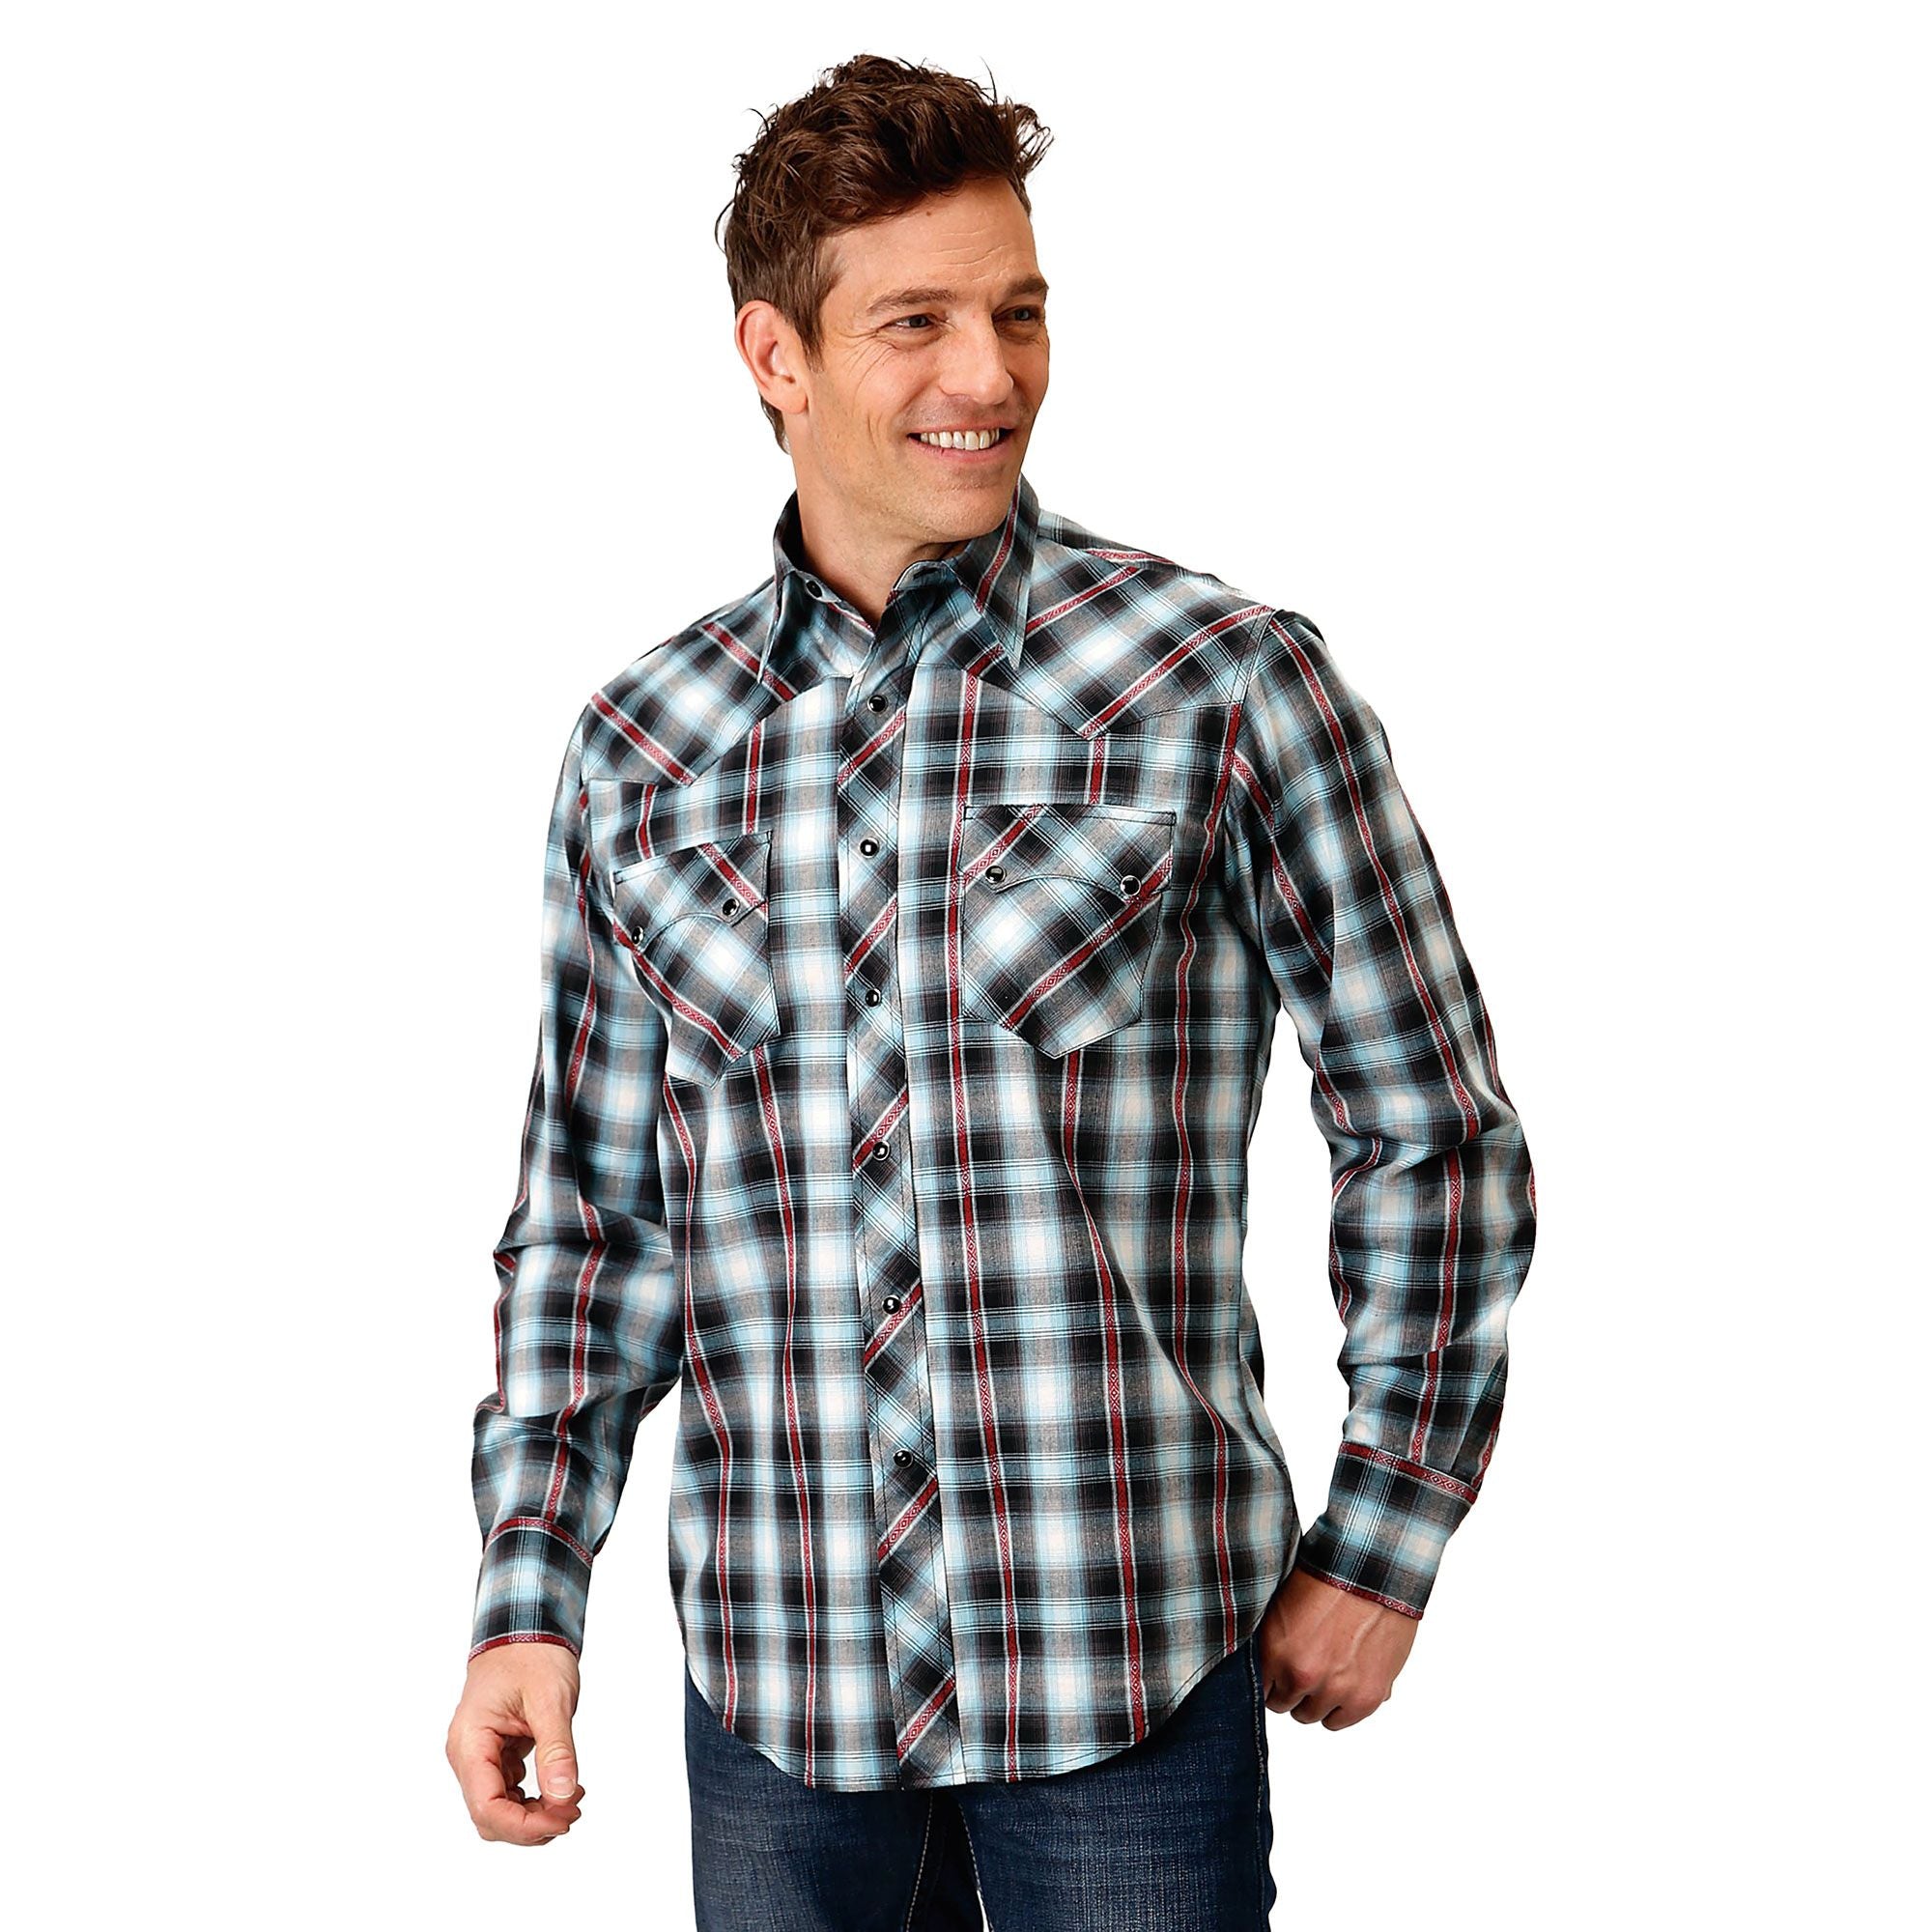 Roper Mns West Made Collection LS Shirt Plaid Black - Summer Clearance